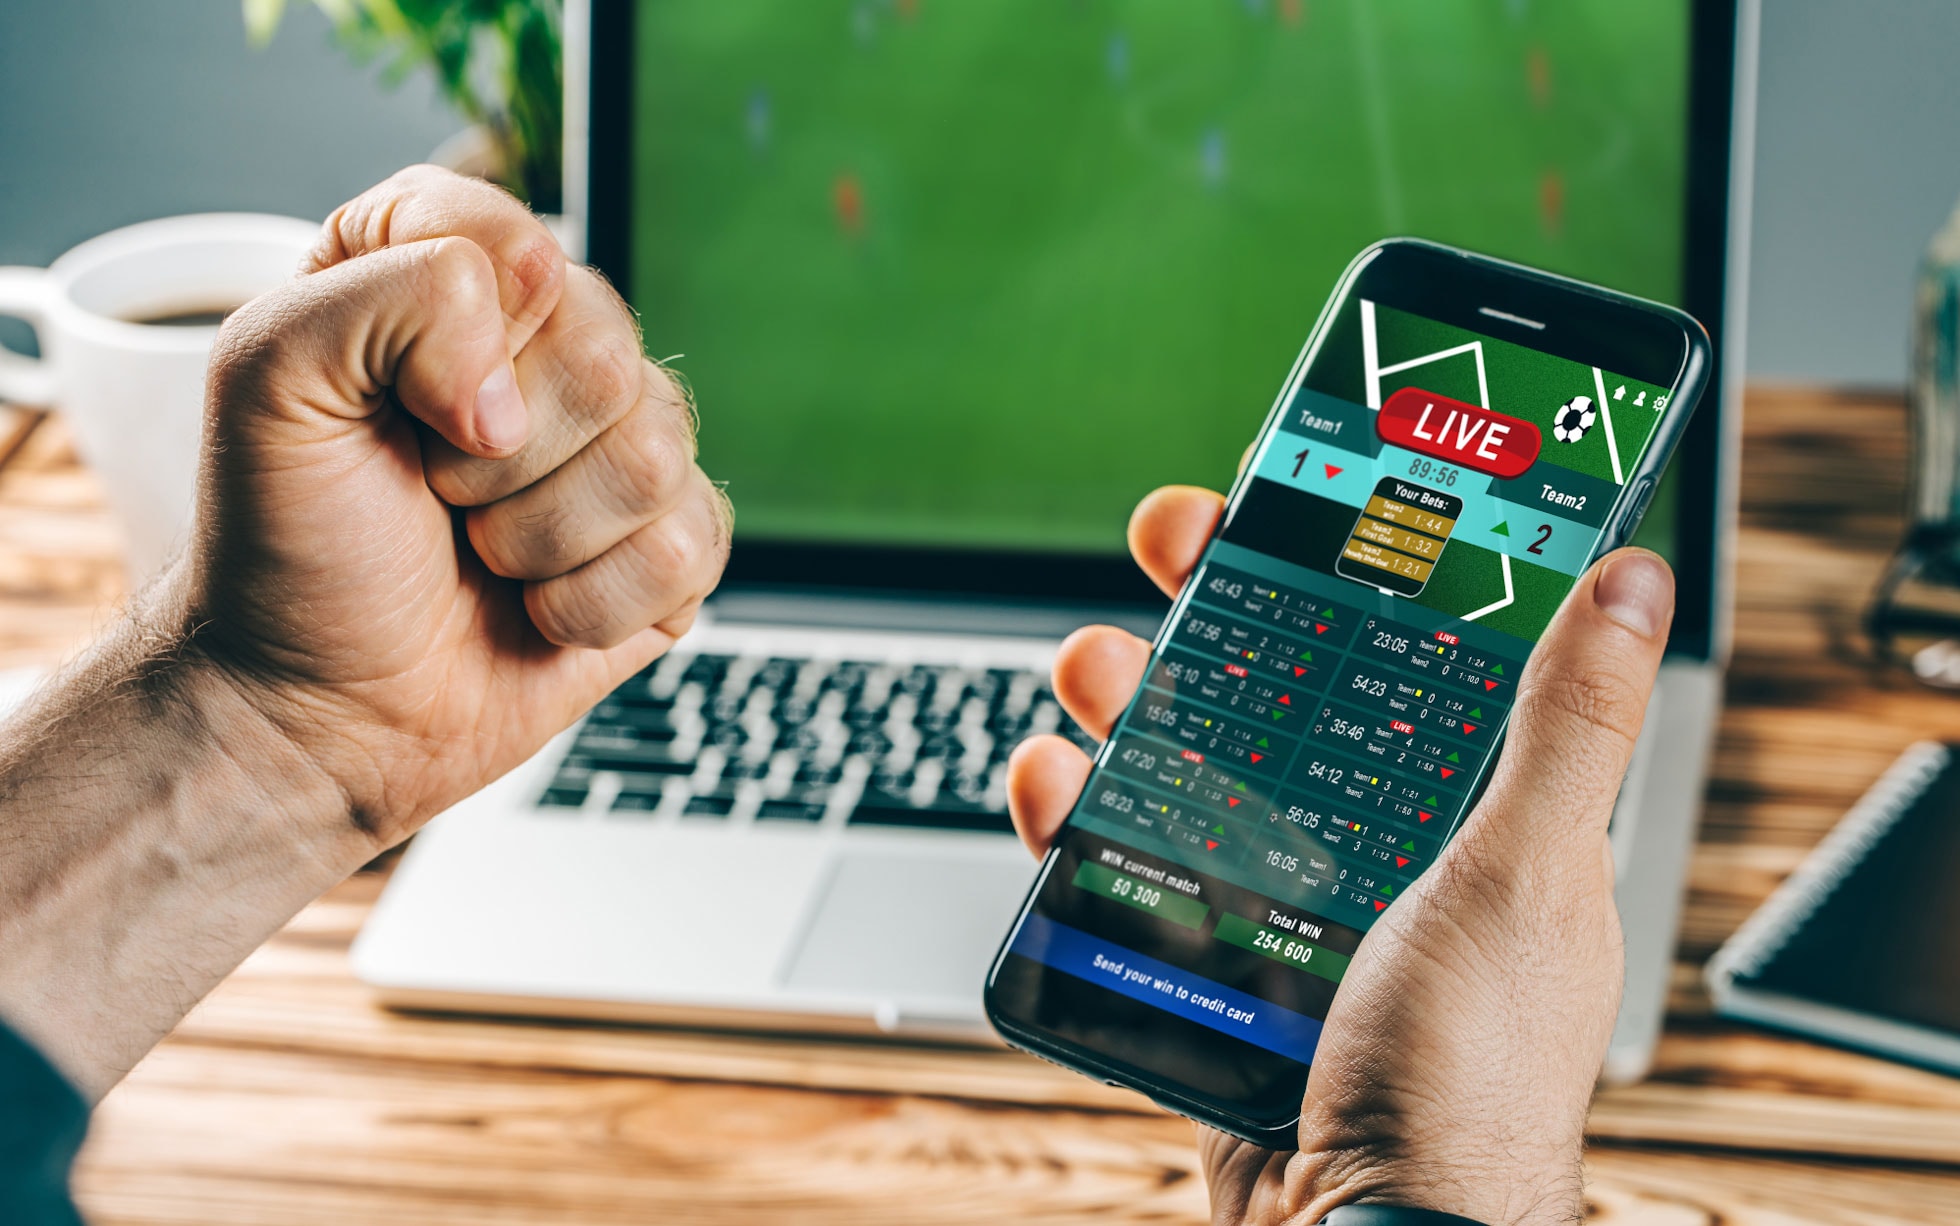 Basic conditions for profitable sports betting